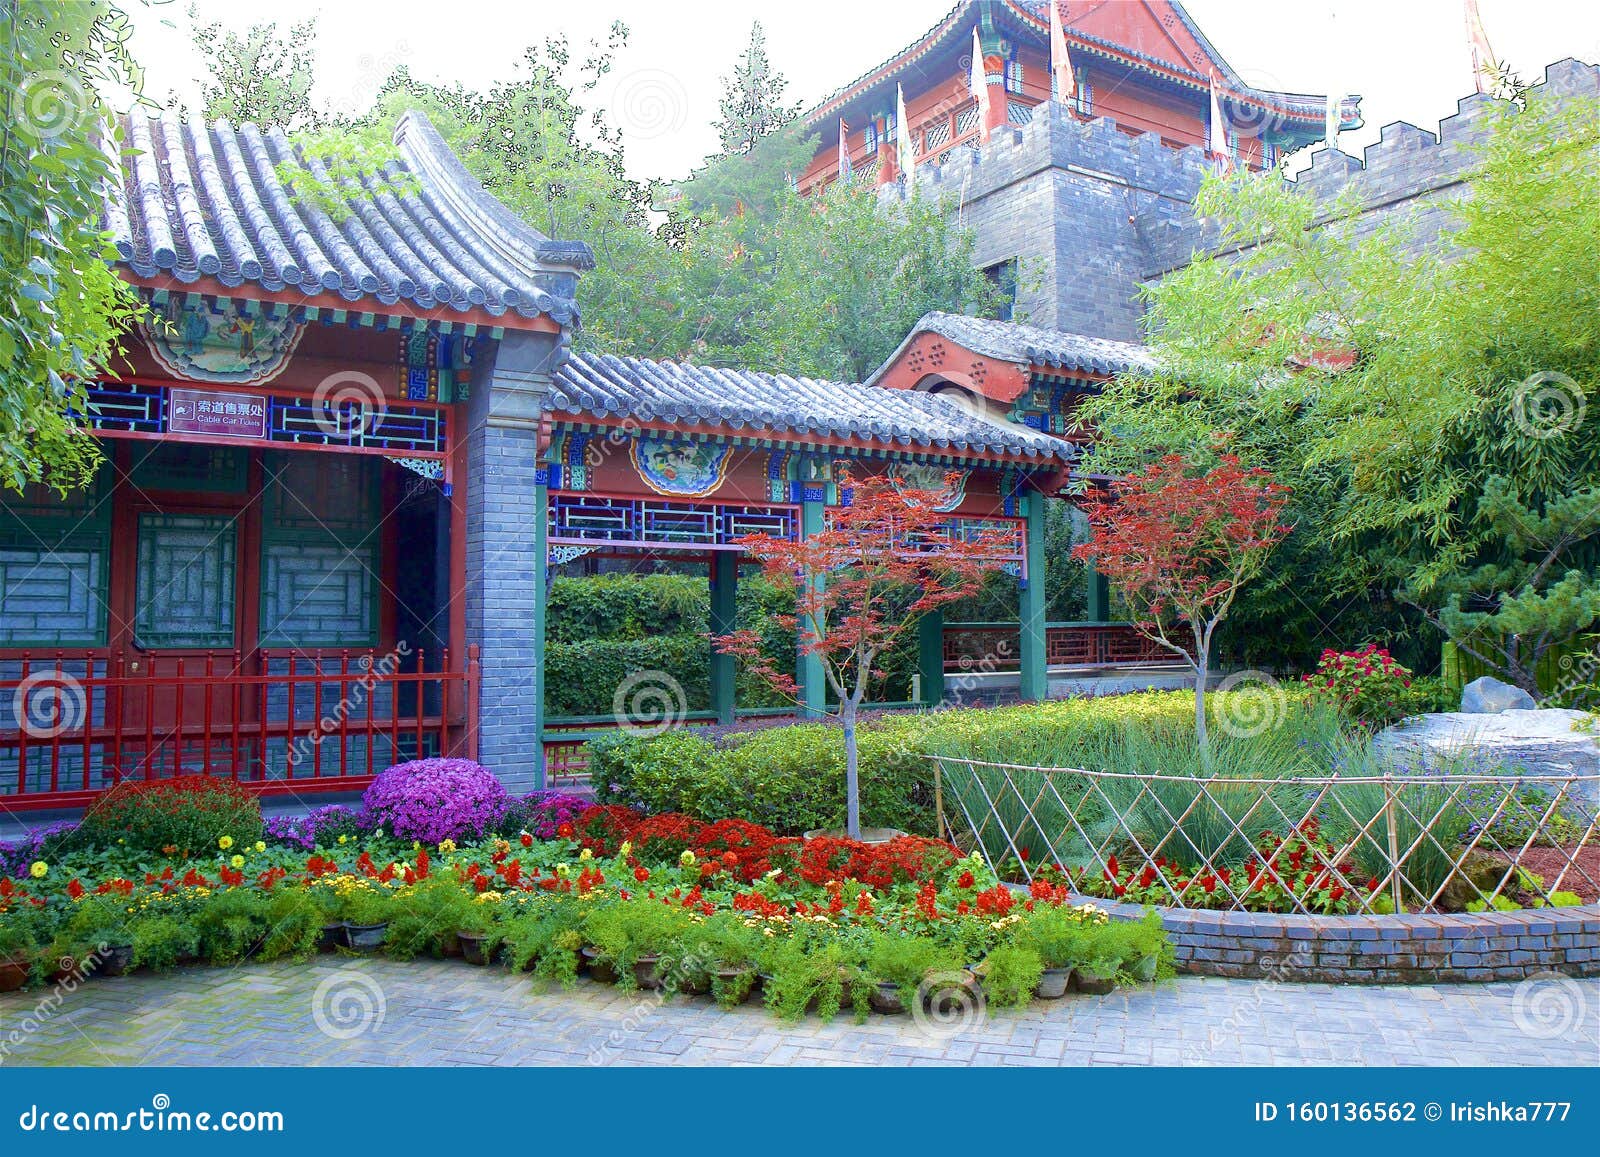 Fragrant Hills Park In Beijing China Stock Photo Image Of